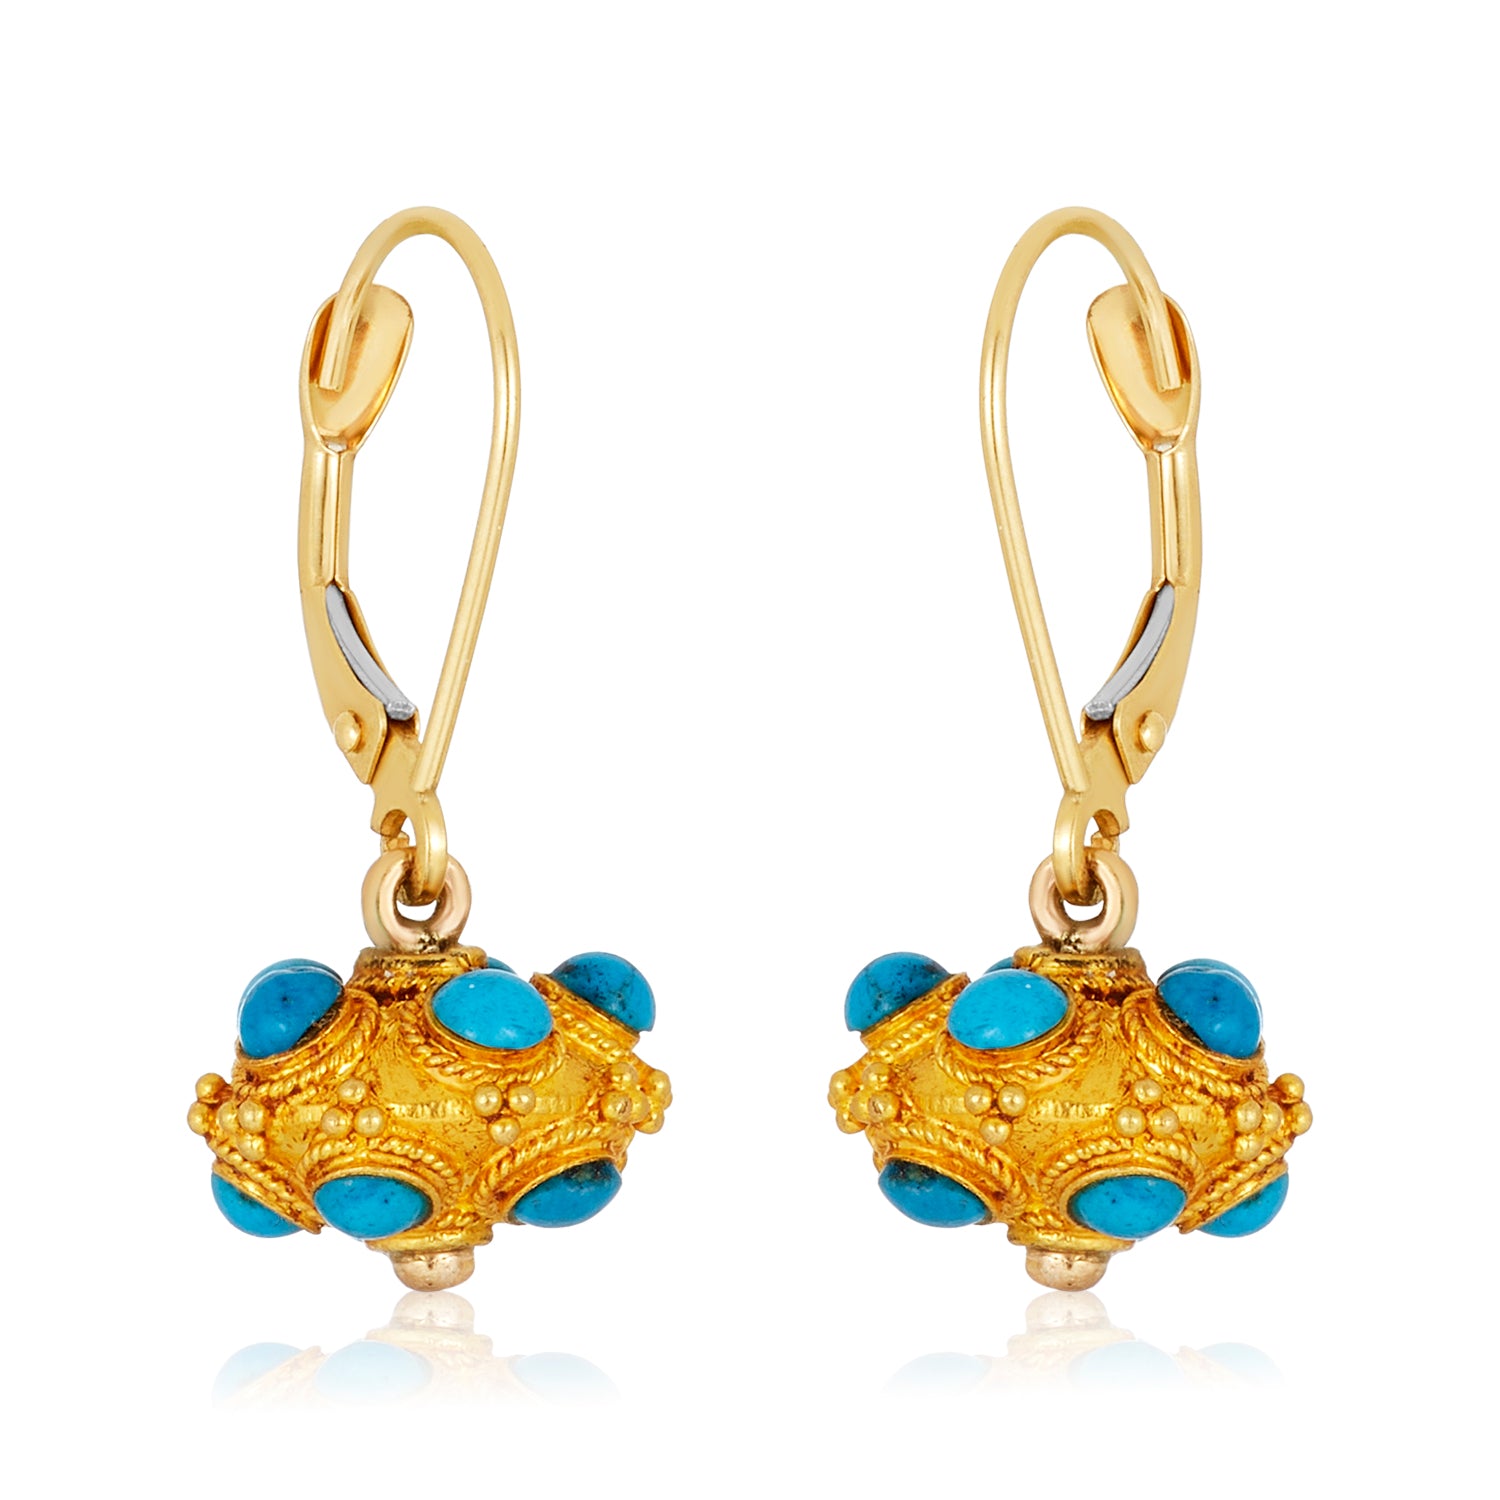 Avery Turquoise Crumble Gold Ball Earrings in 14k